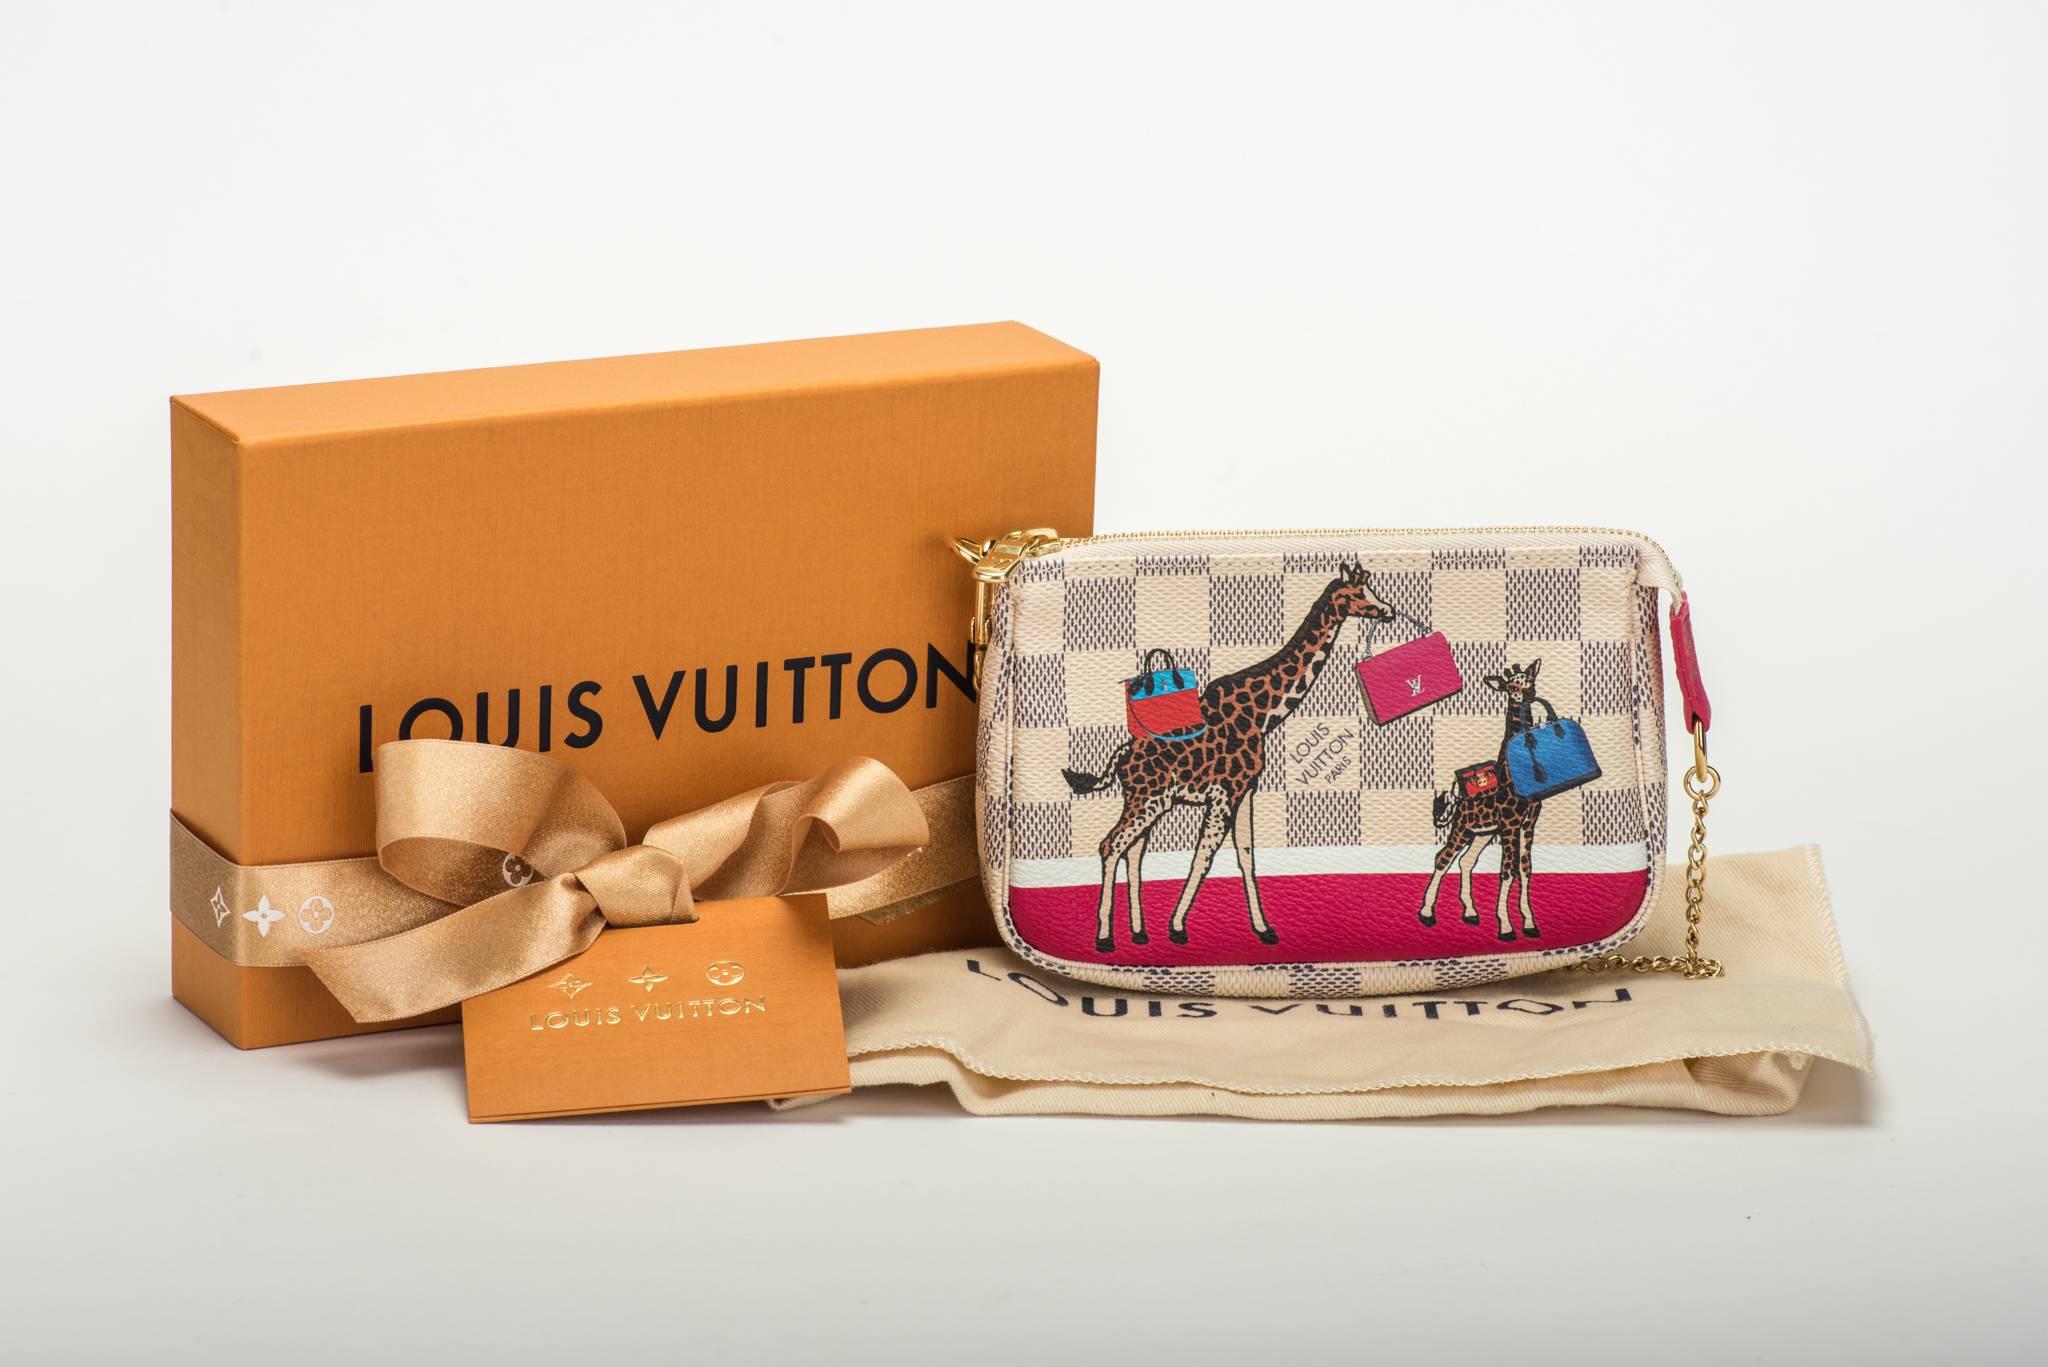 Louis Vuitton limited edition mini pouches admire azur with giraffe . Christmas collection. Brand new in box with original dust cover and ribbon.